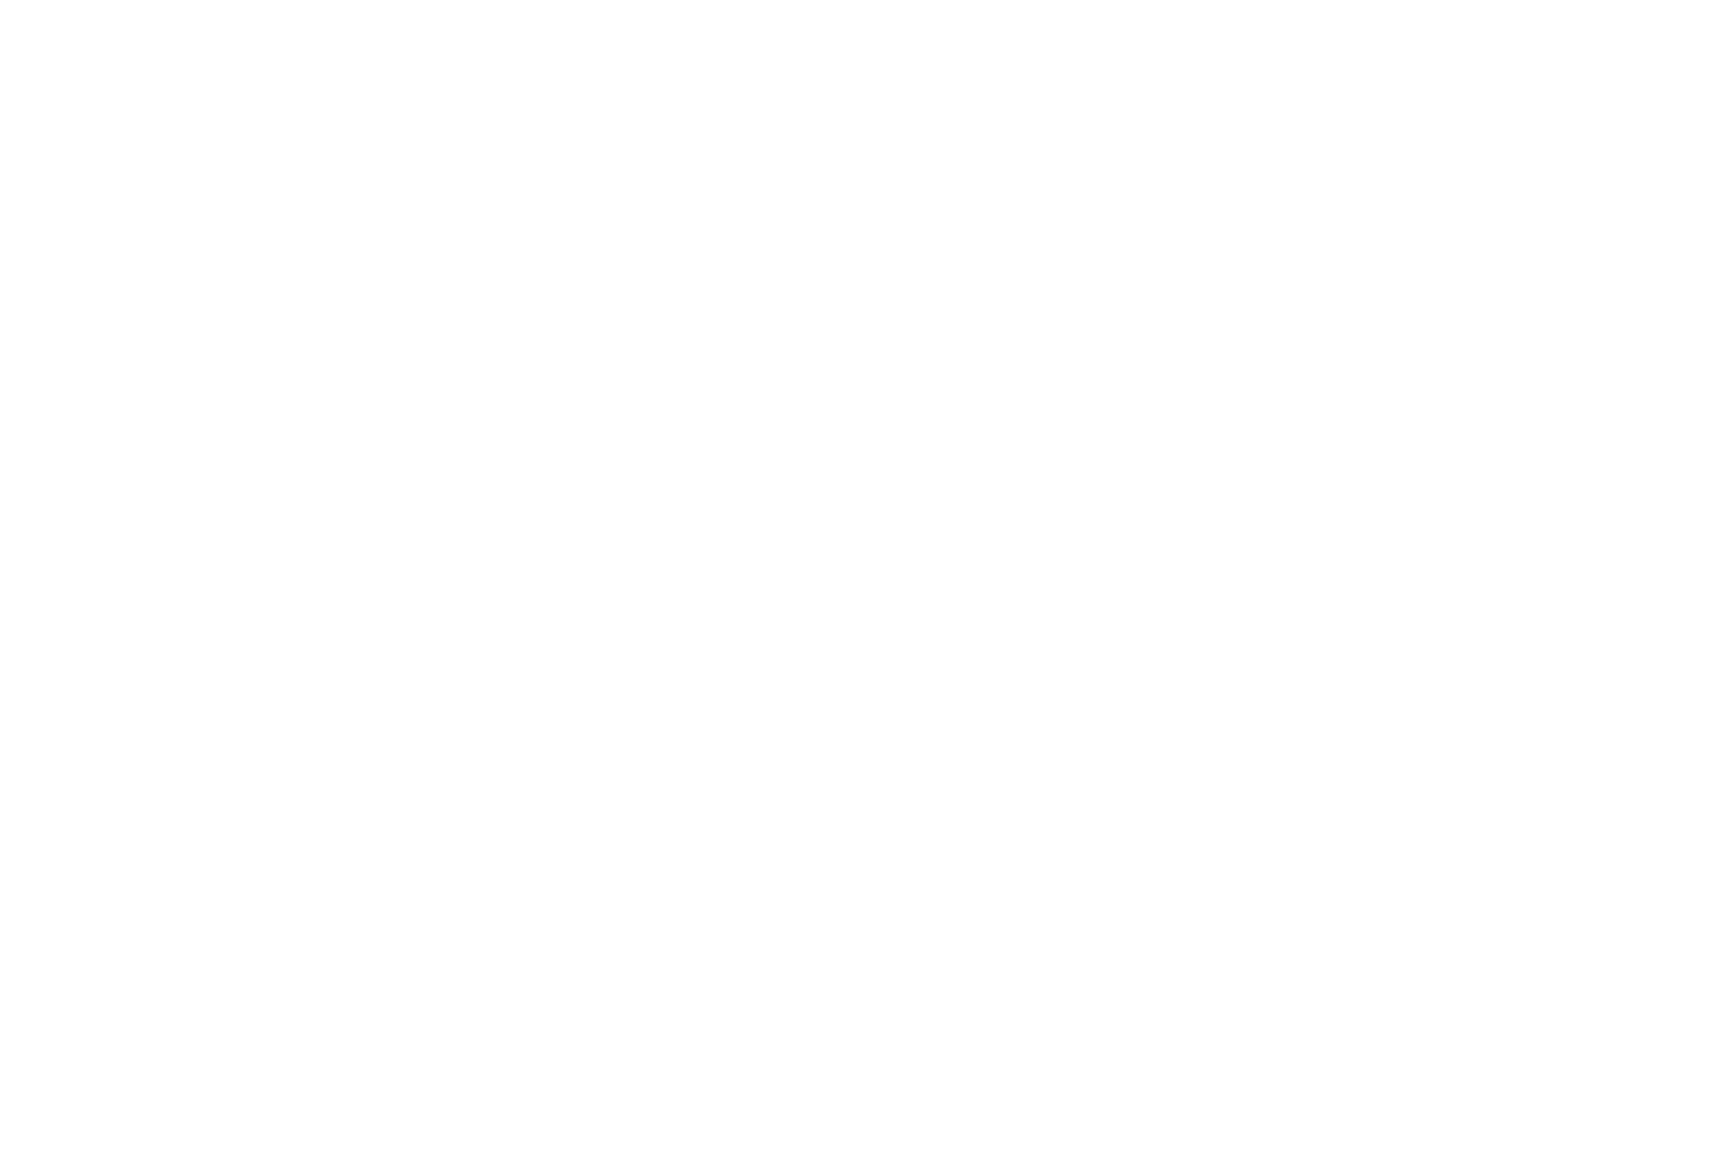 Best Christian Recovery Film - Content Film Festival and Media Summit - 2021